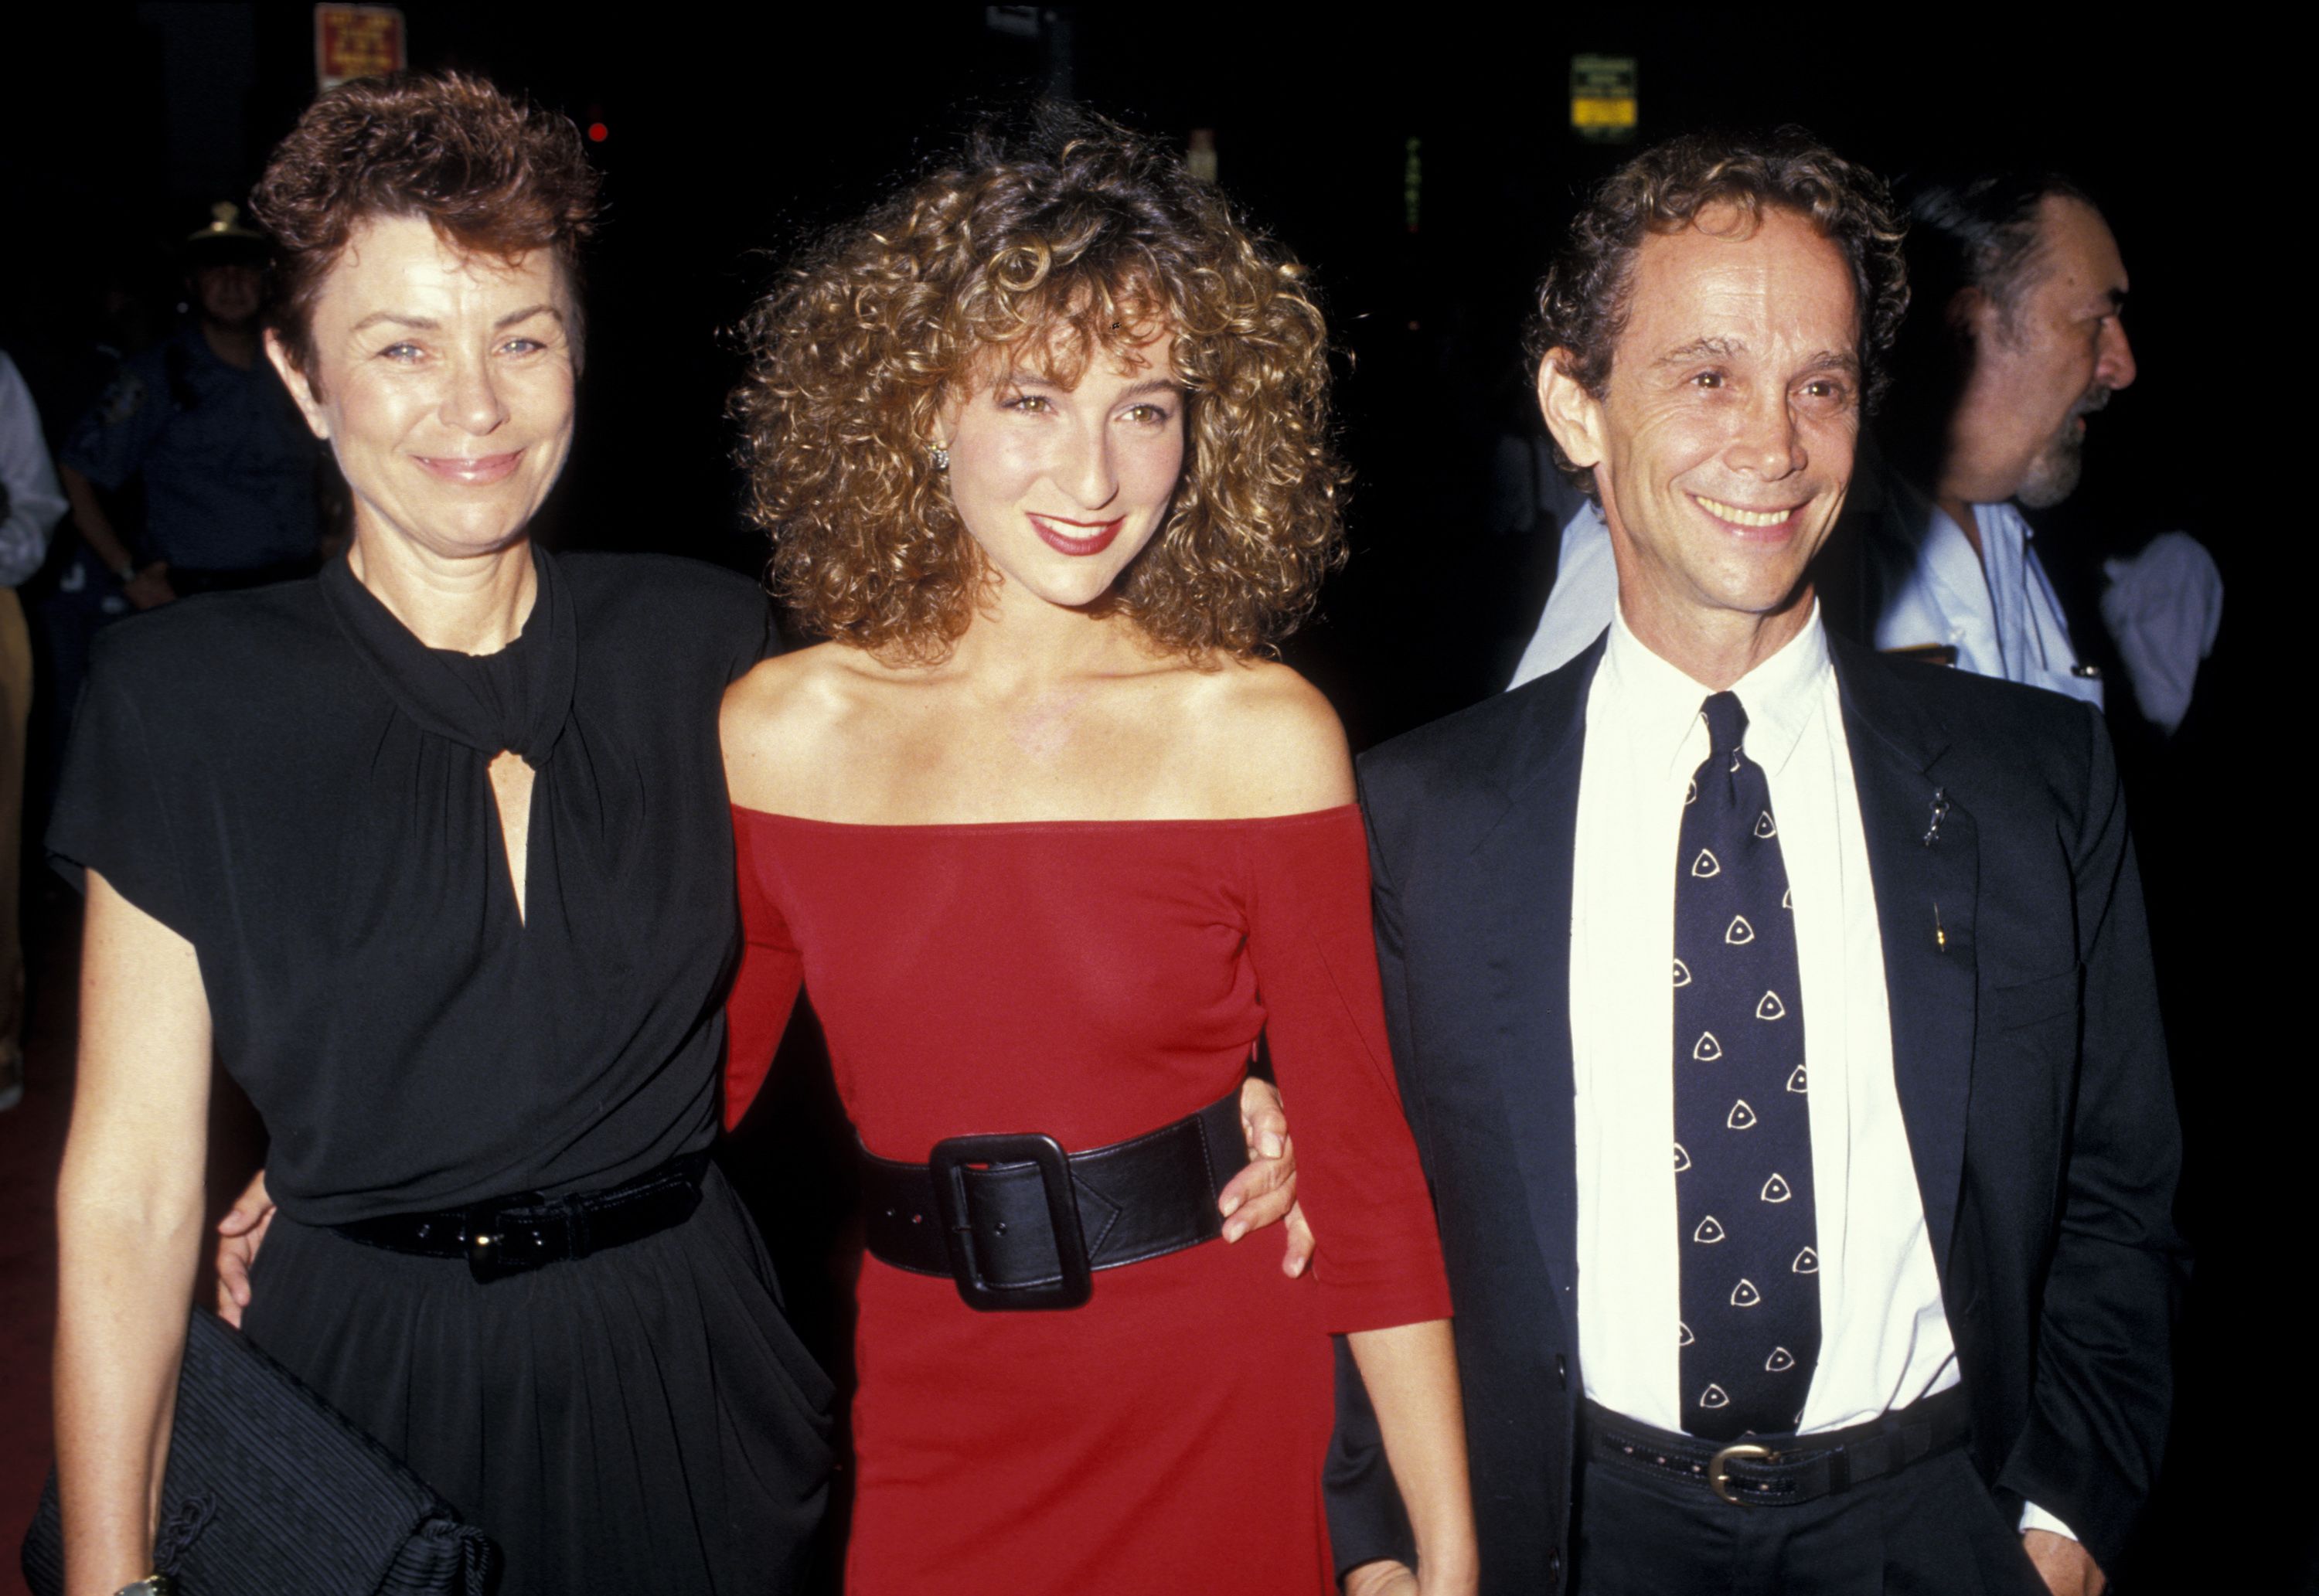 Jo Wilder, Jennifer Grey, and Joel Grey at the premiere of "Dirty Dancing" in 1987 in New York | Source: Getty Images